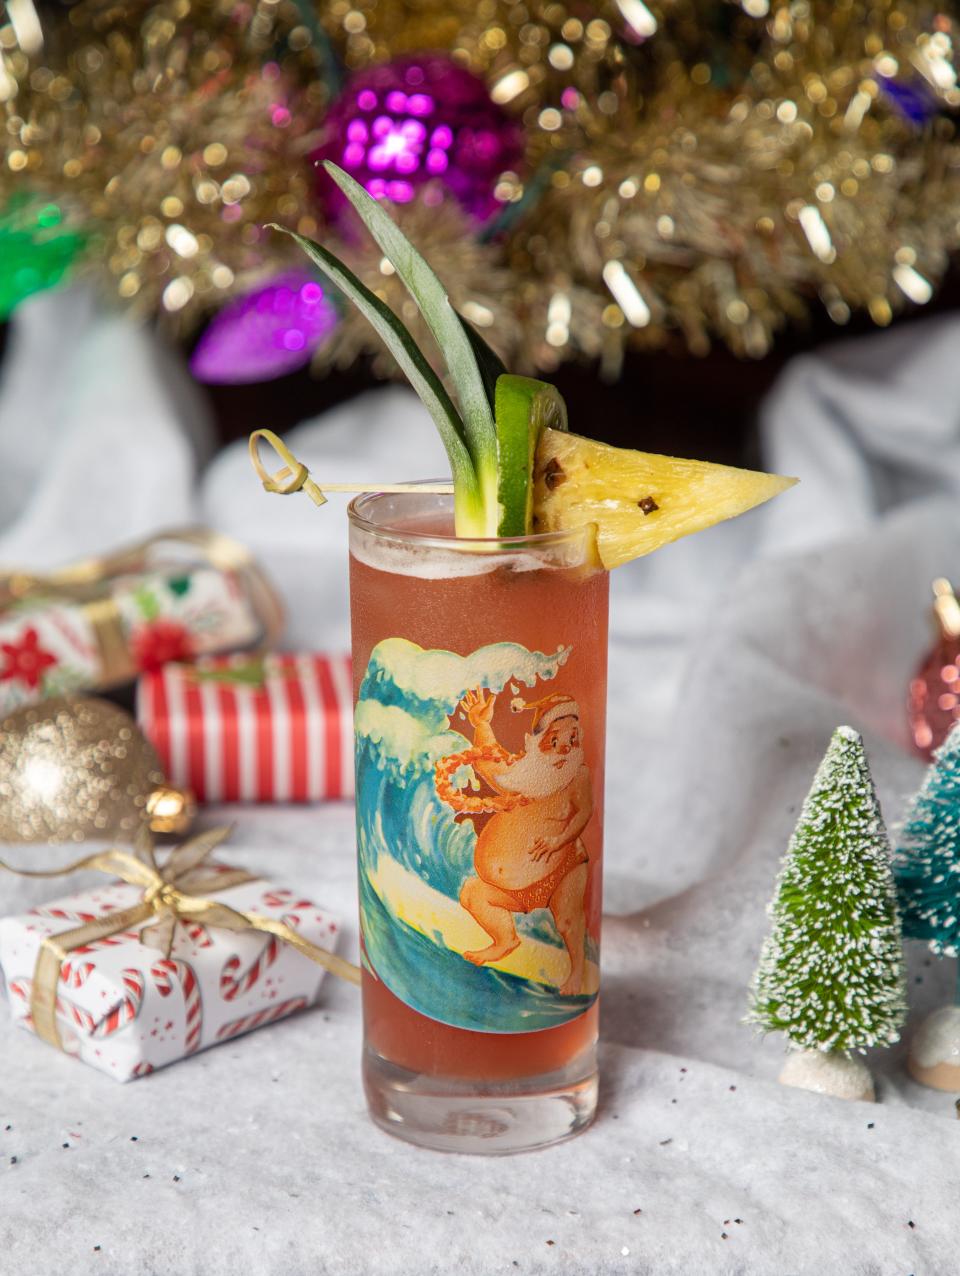 The Jingle Bird cocktail at the pop-up Sippin' Santa at North of Bourbon in Germantown.